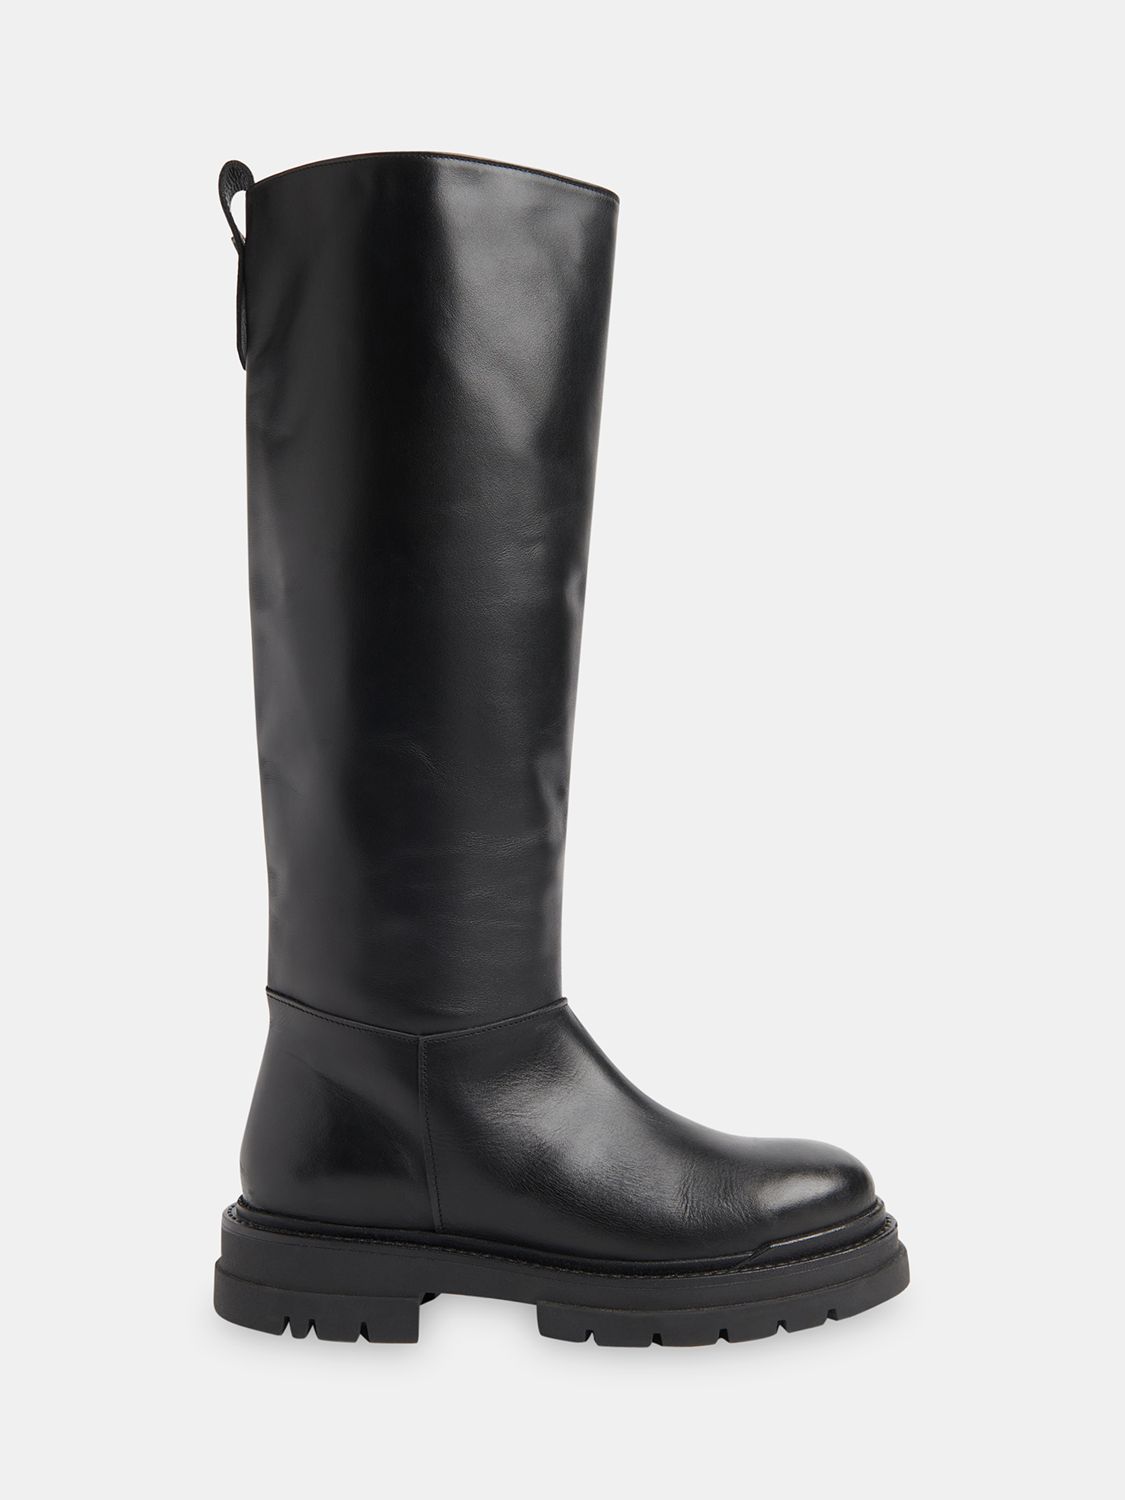 Whistles Maceo Lug Sole Leather Knee High Boots, Black at John Lewis ...